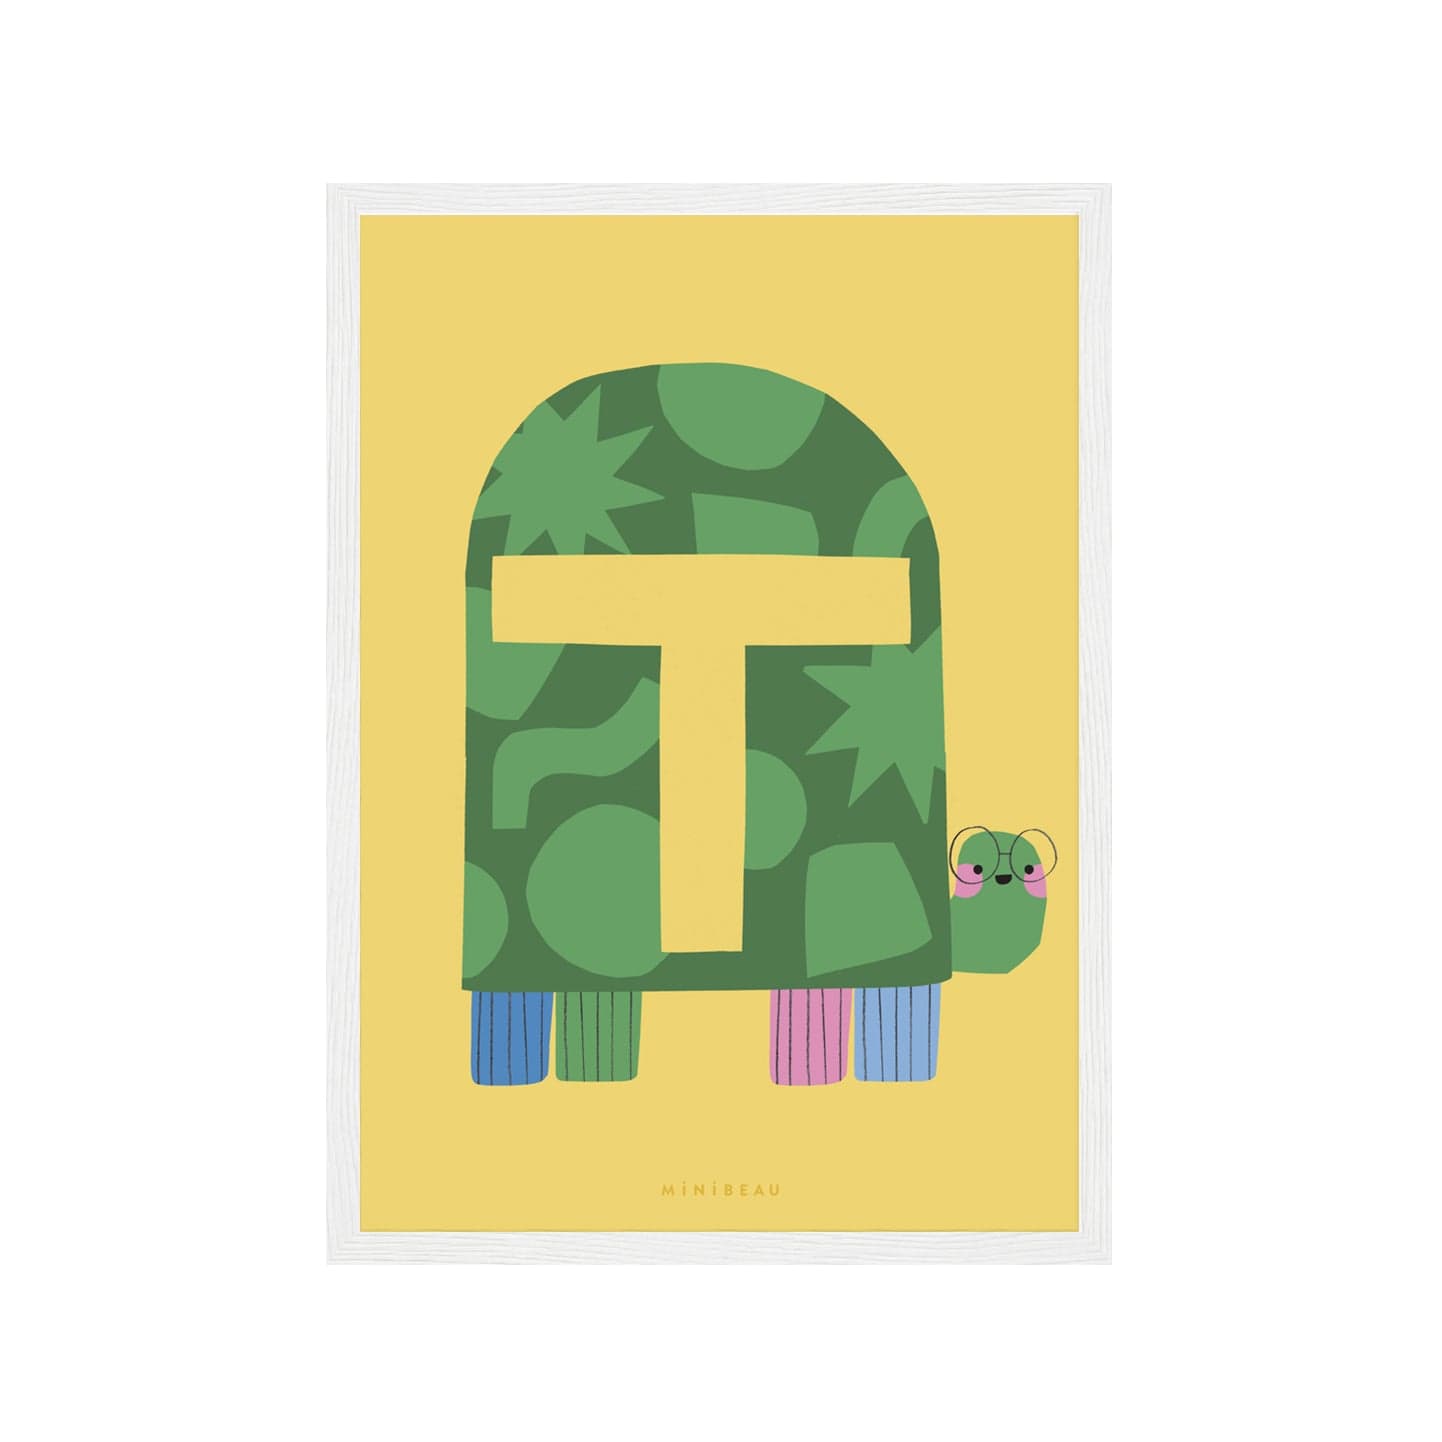 Art print in a white frame. Our Happy Alphabet 'T' Art Print shows a tortoise looking back smiling, wearing wire framed glasses, with a large yellow T on it's shell. Each leg is a different colour, blue, green, pink and lilac, all on a yellow background.